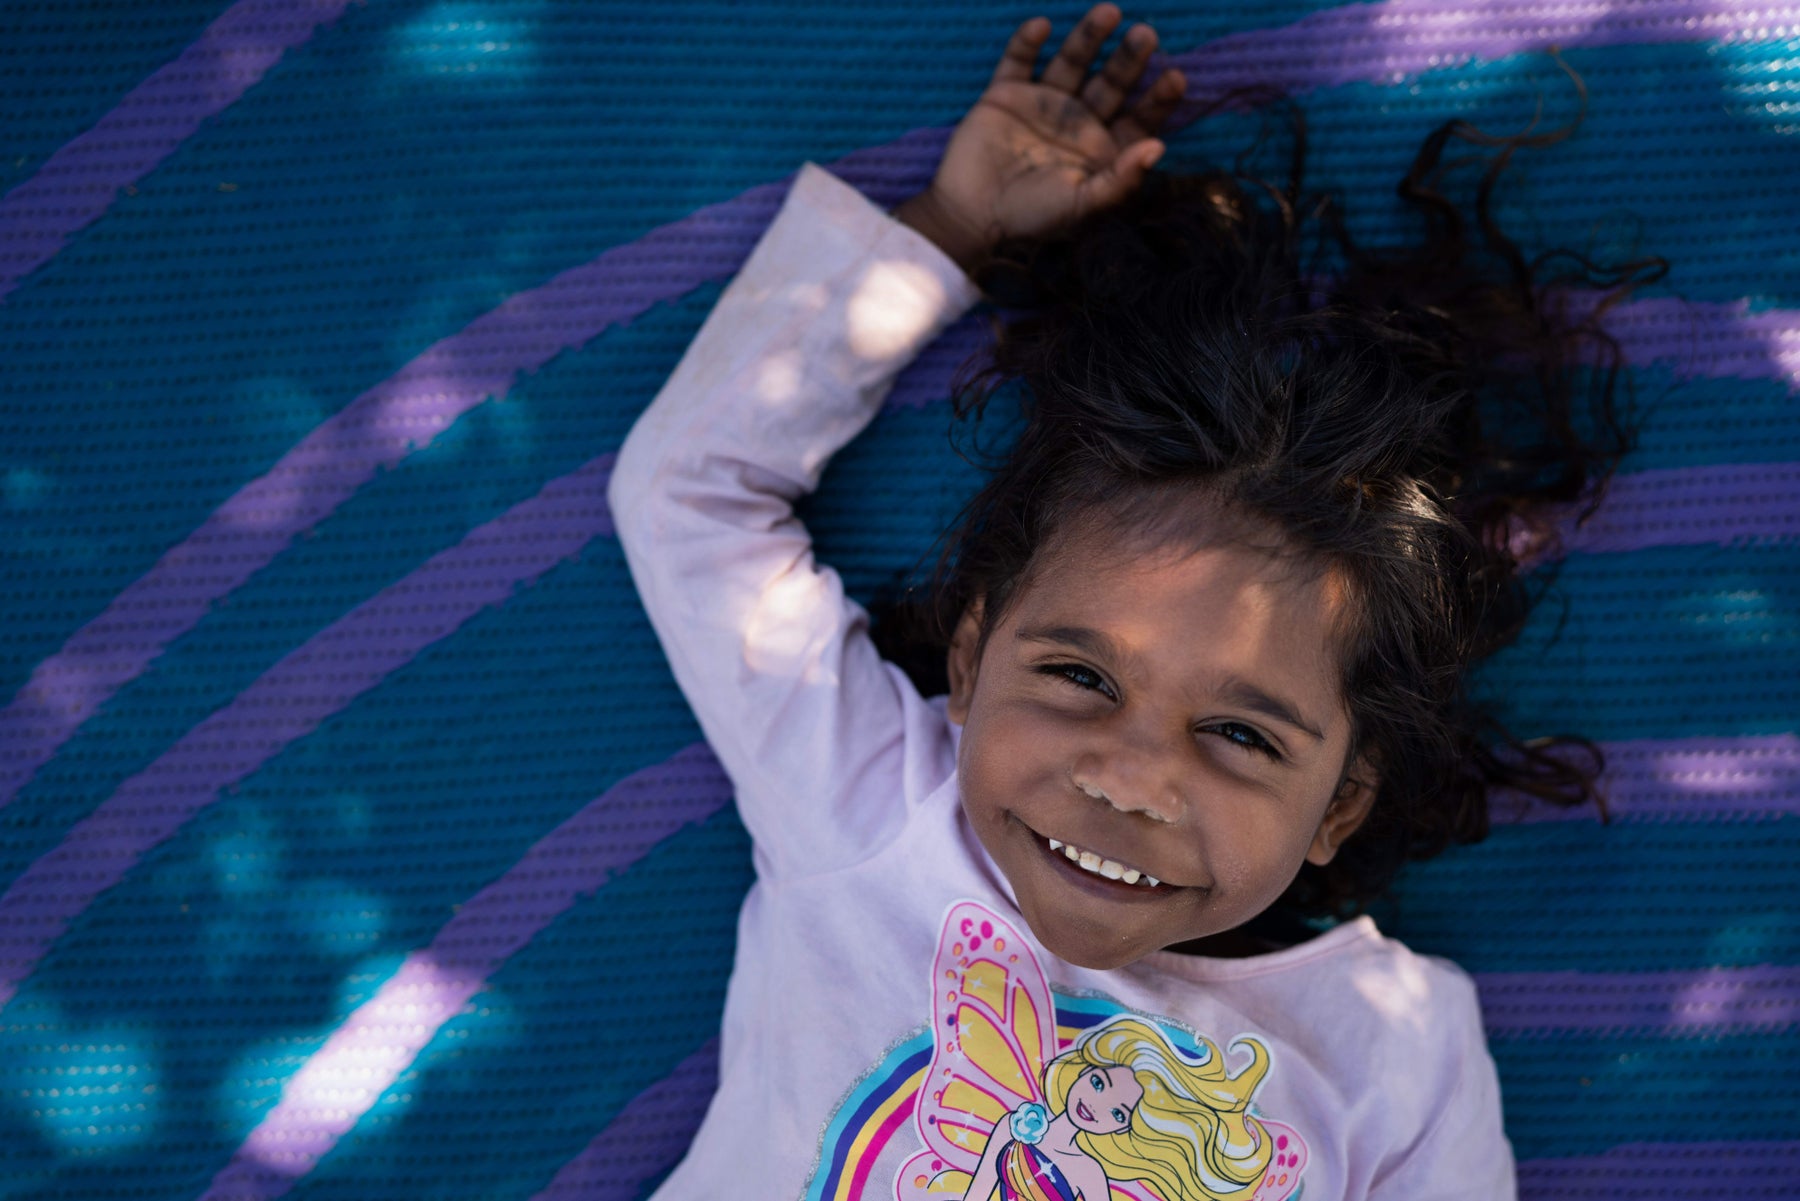 A First Nations child smiling up at a camera while lying on a purple blanket